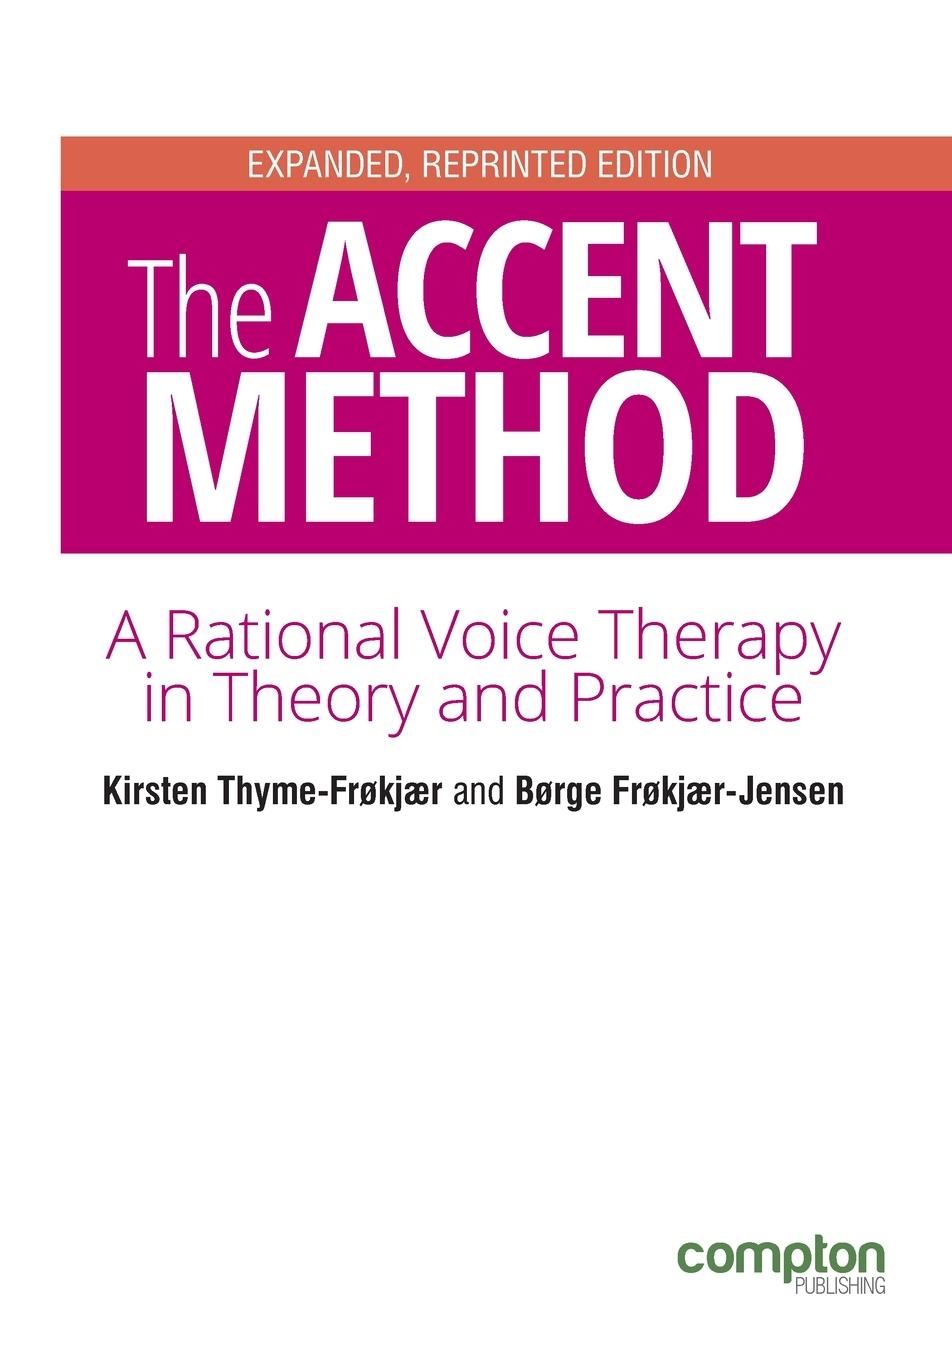 Book Accent Method of Voice Therapy Kirsten Thyme-Frokjaer